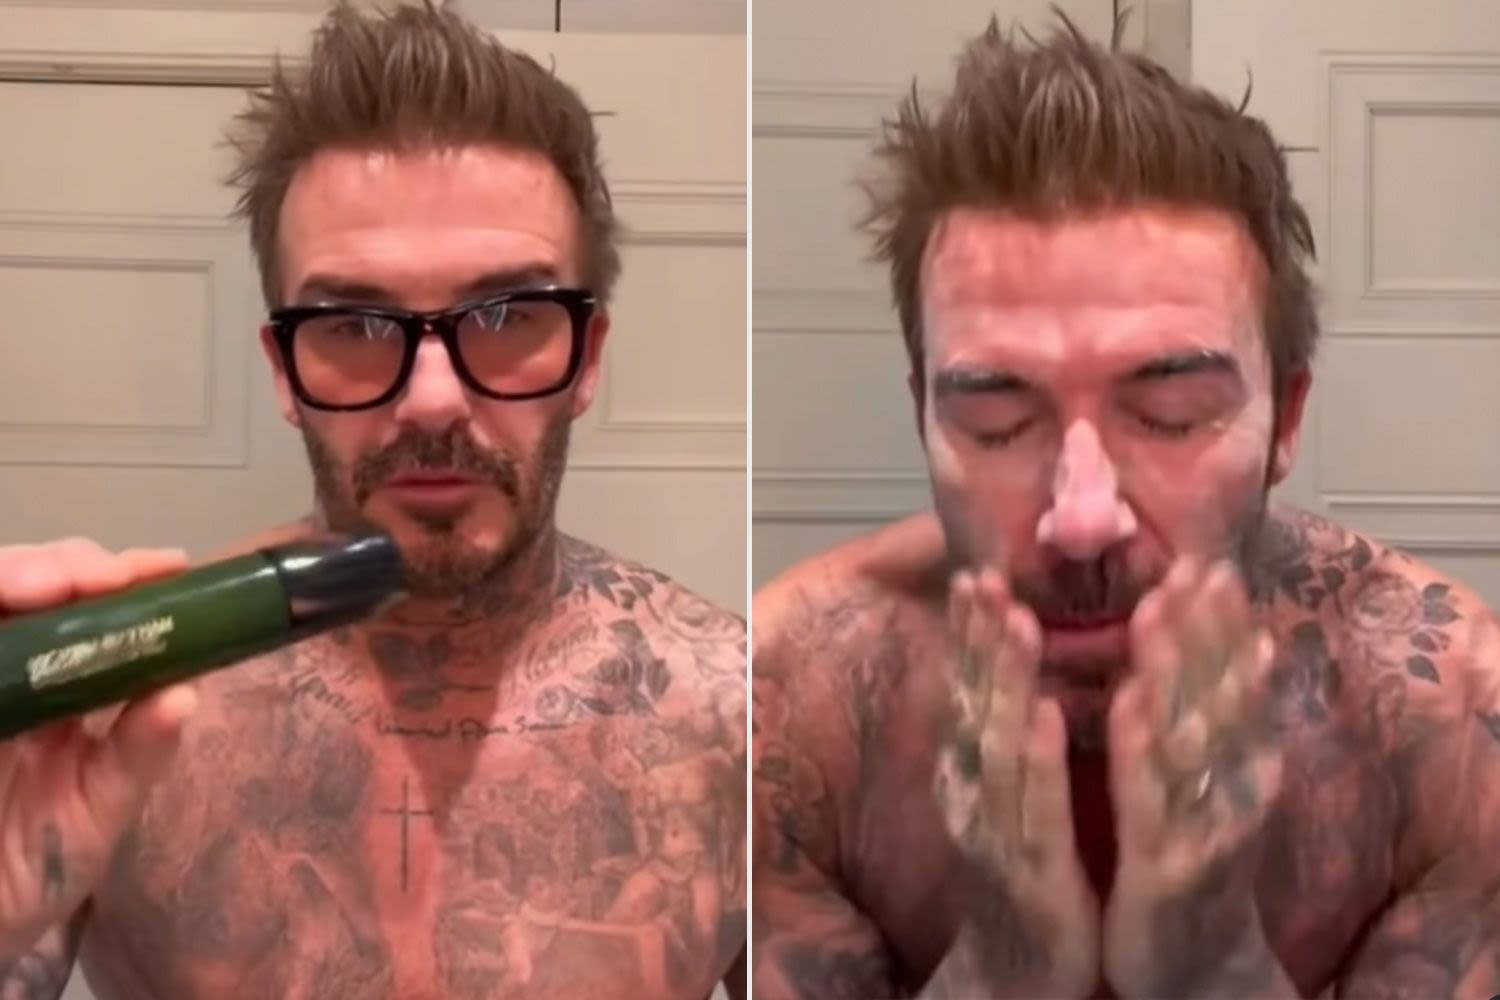 David Beckham Takes Over Wife Victoria’s Instagram and Shares Video of His Shirtless Morning Skincare Routine